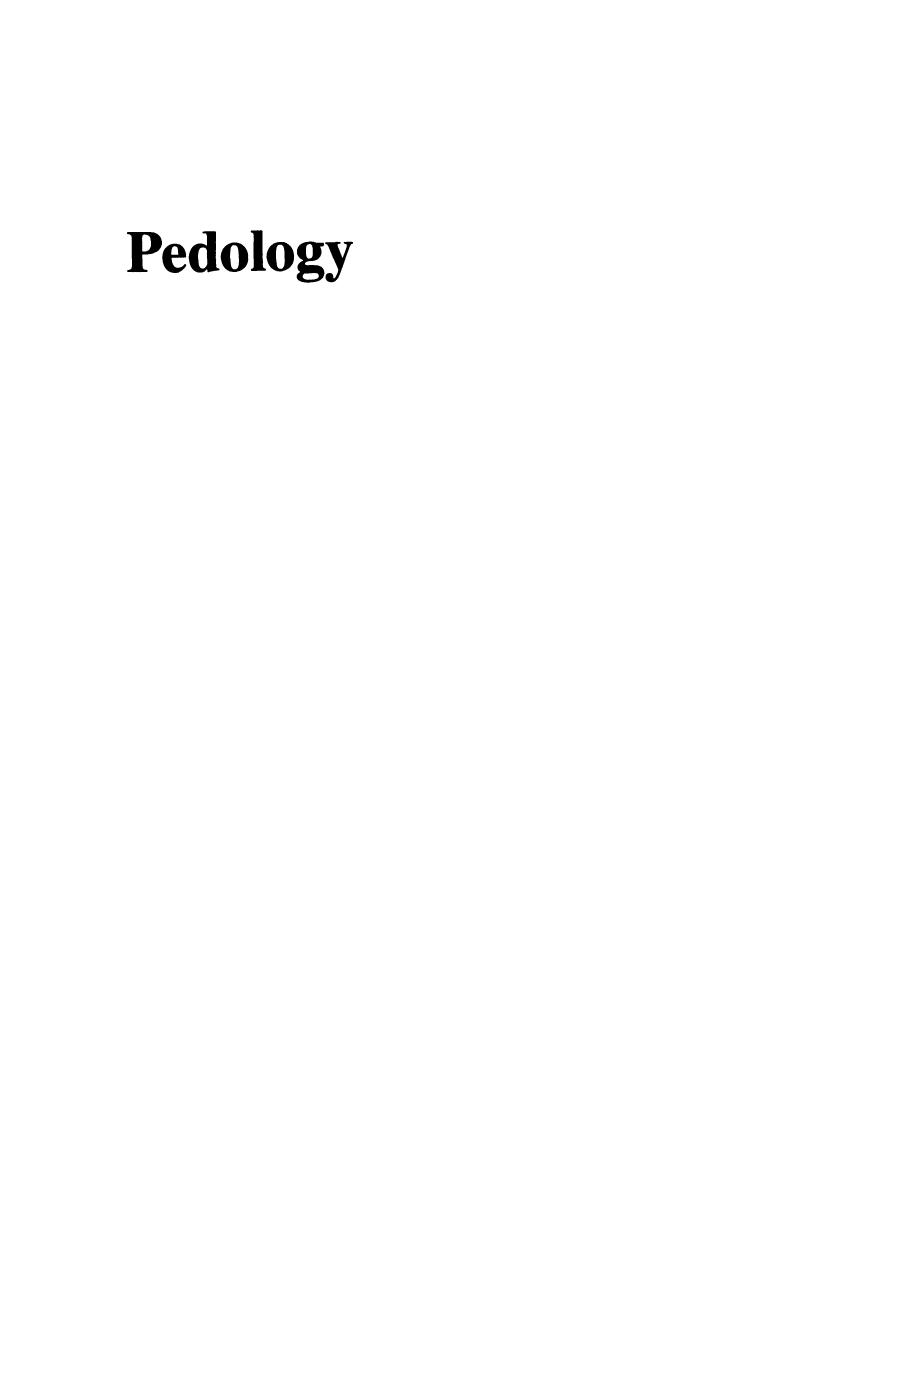 Pedology Pedogenesis and classification by P. Duchaufour (auth.) (z-lib.org). 1982